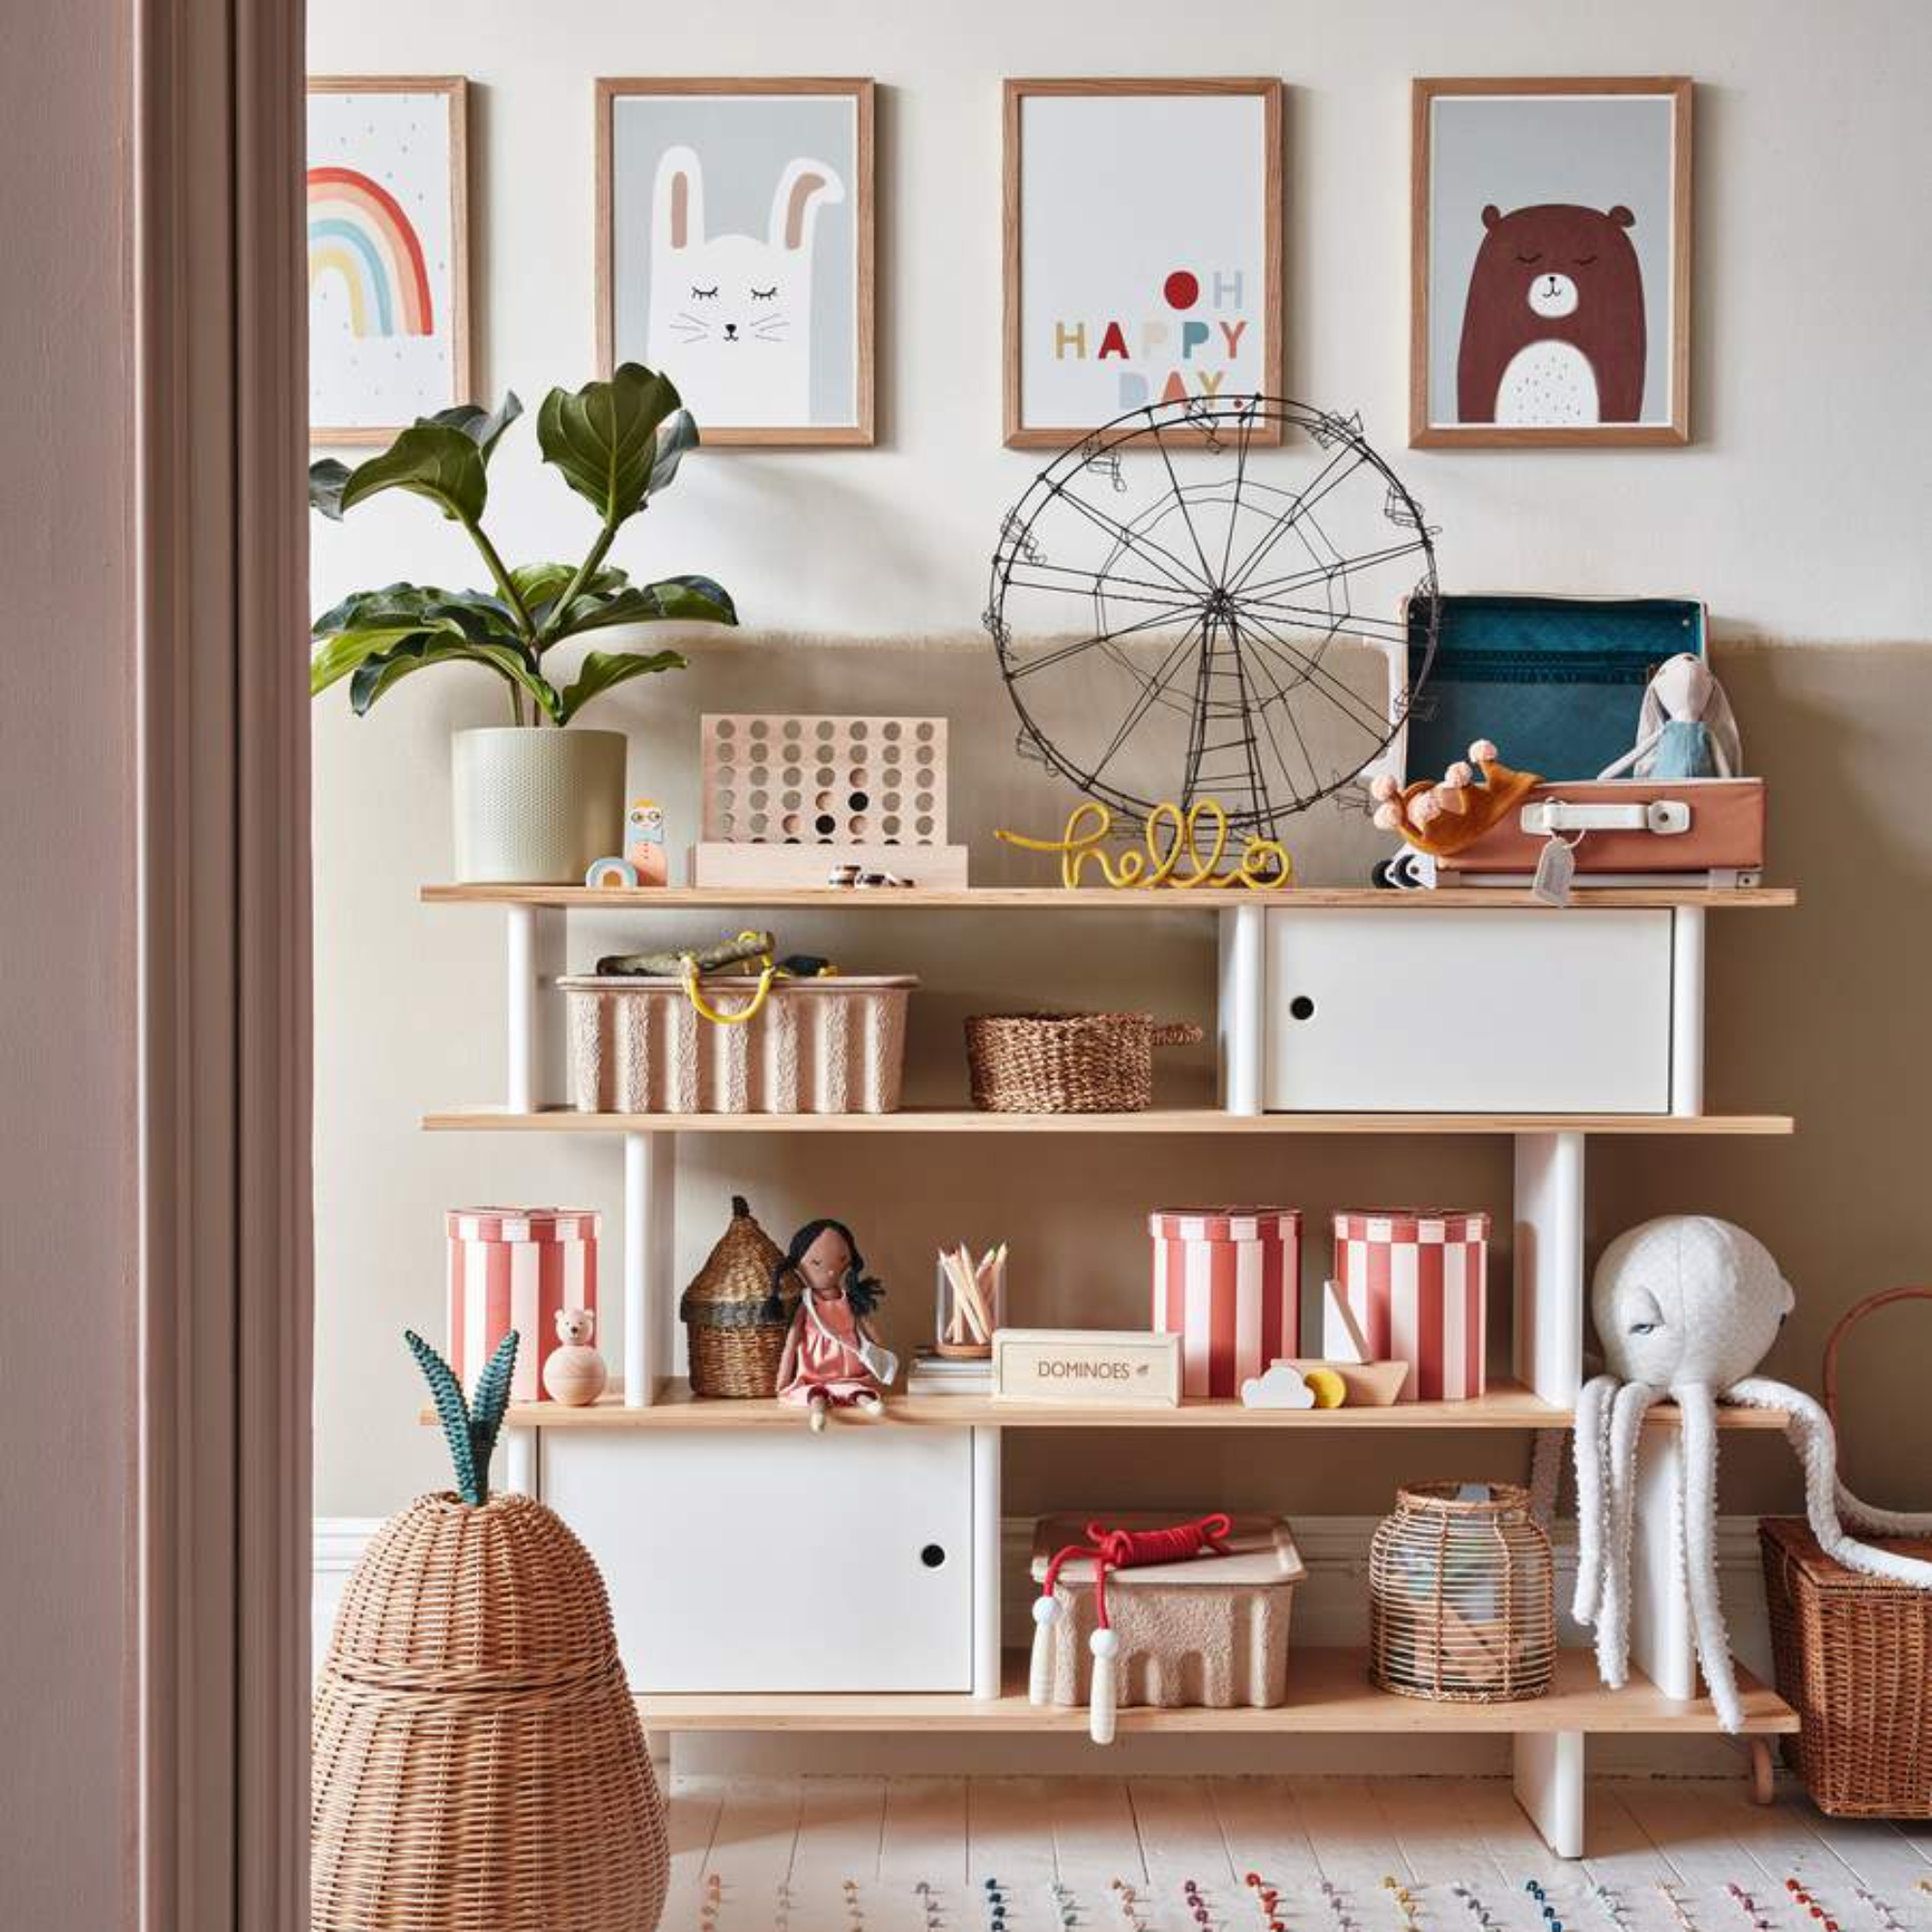 Chidrens room with shelving unit displaying assortment of home decor and hanging artwork